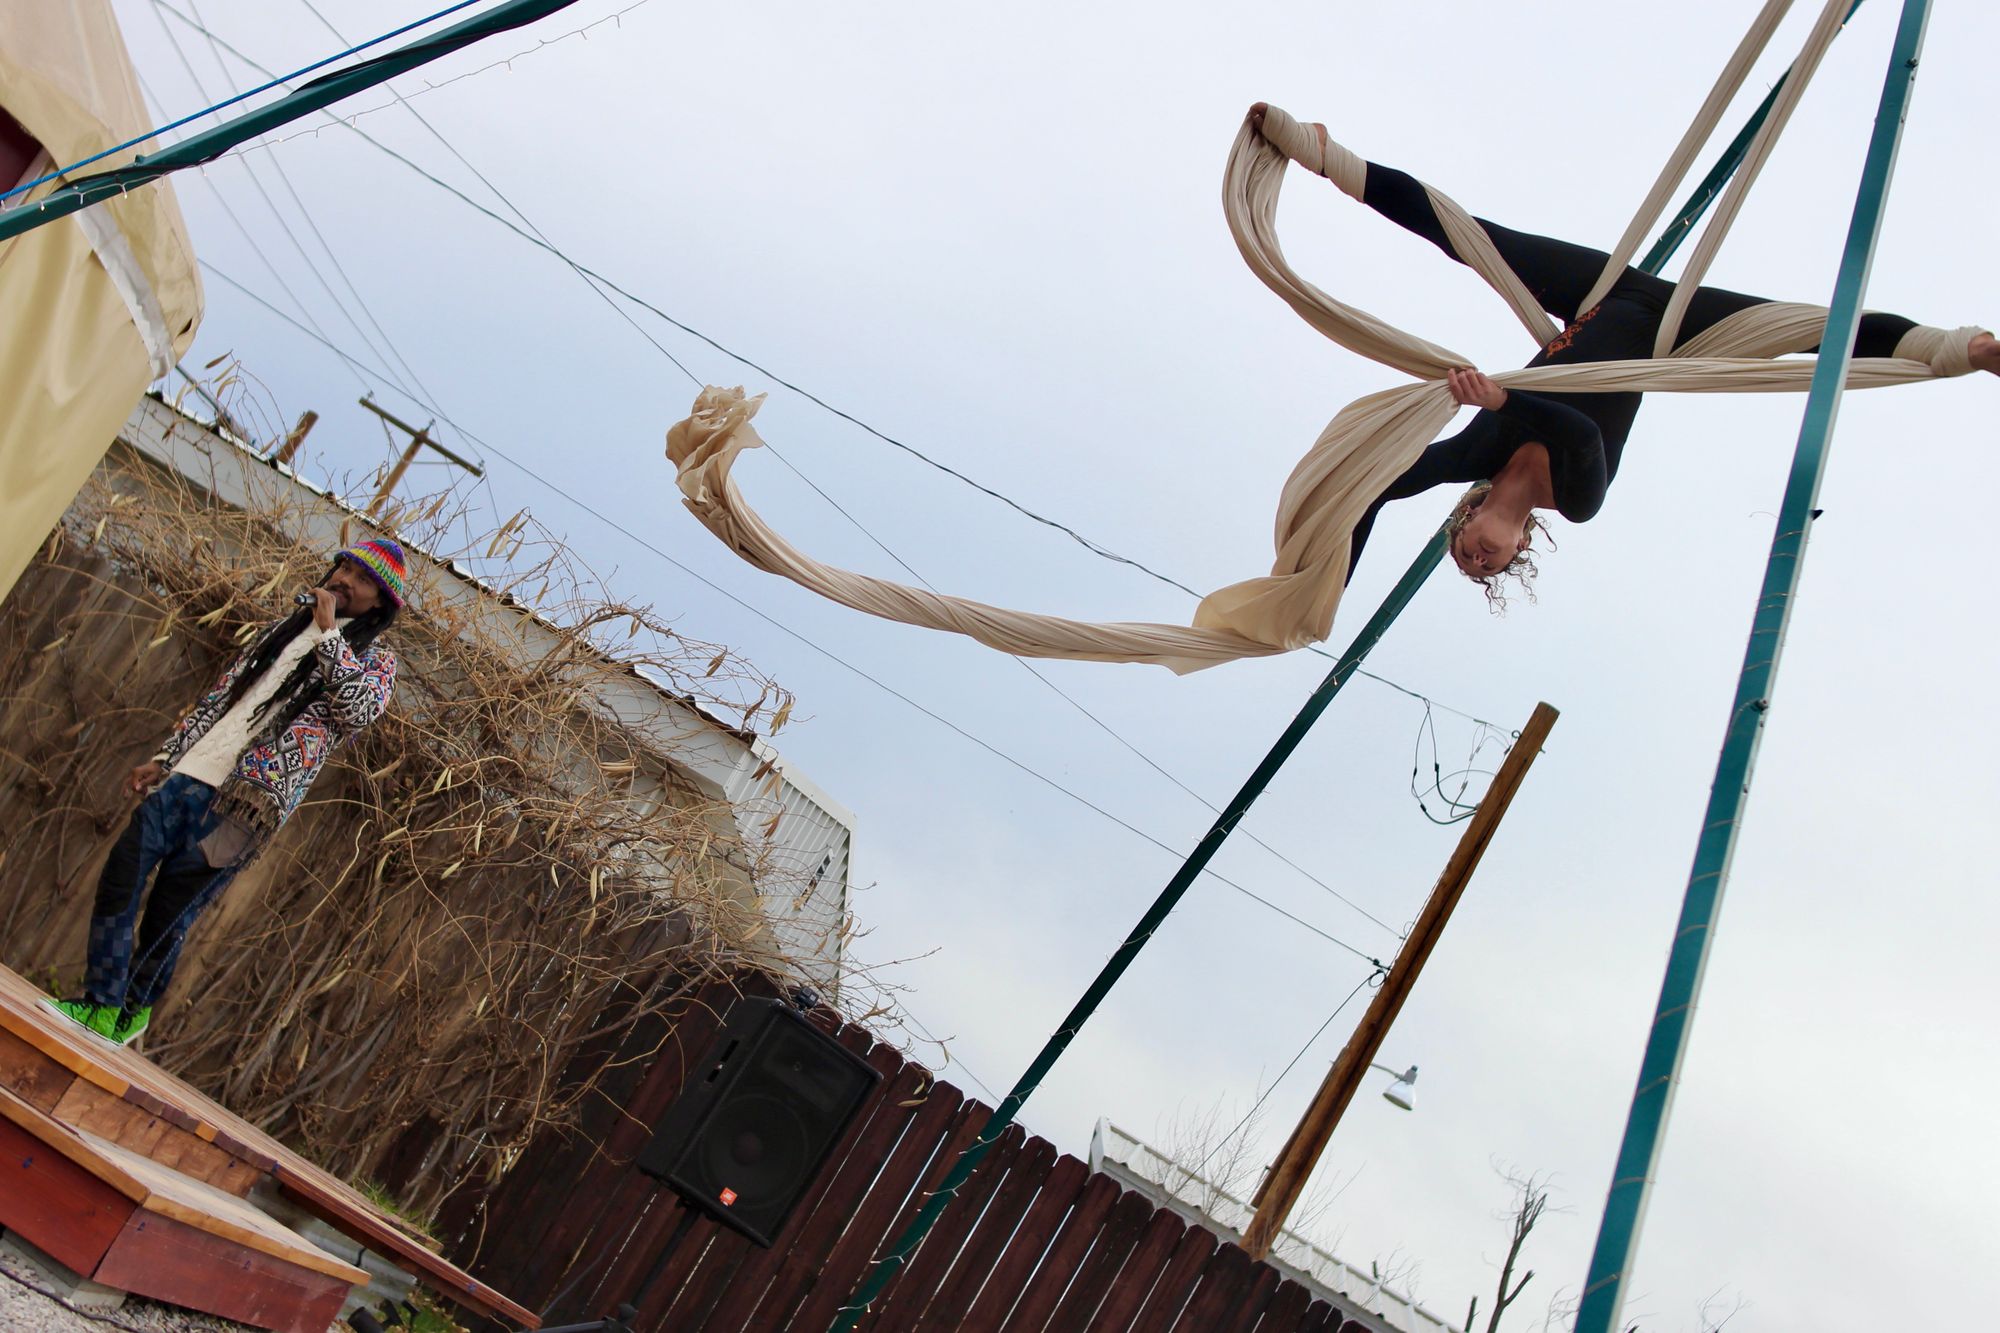 Woman performing aerial silks outside on white fabric while man holding microphone raps. 